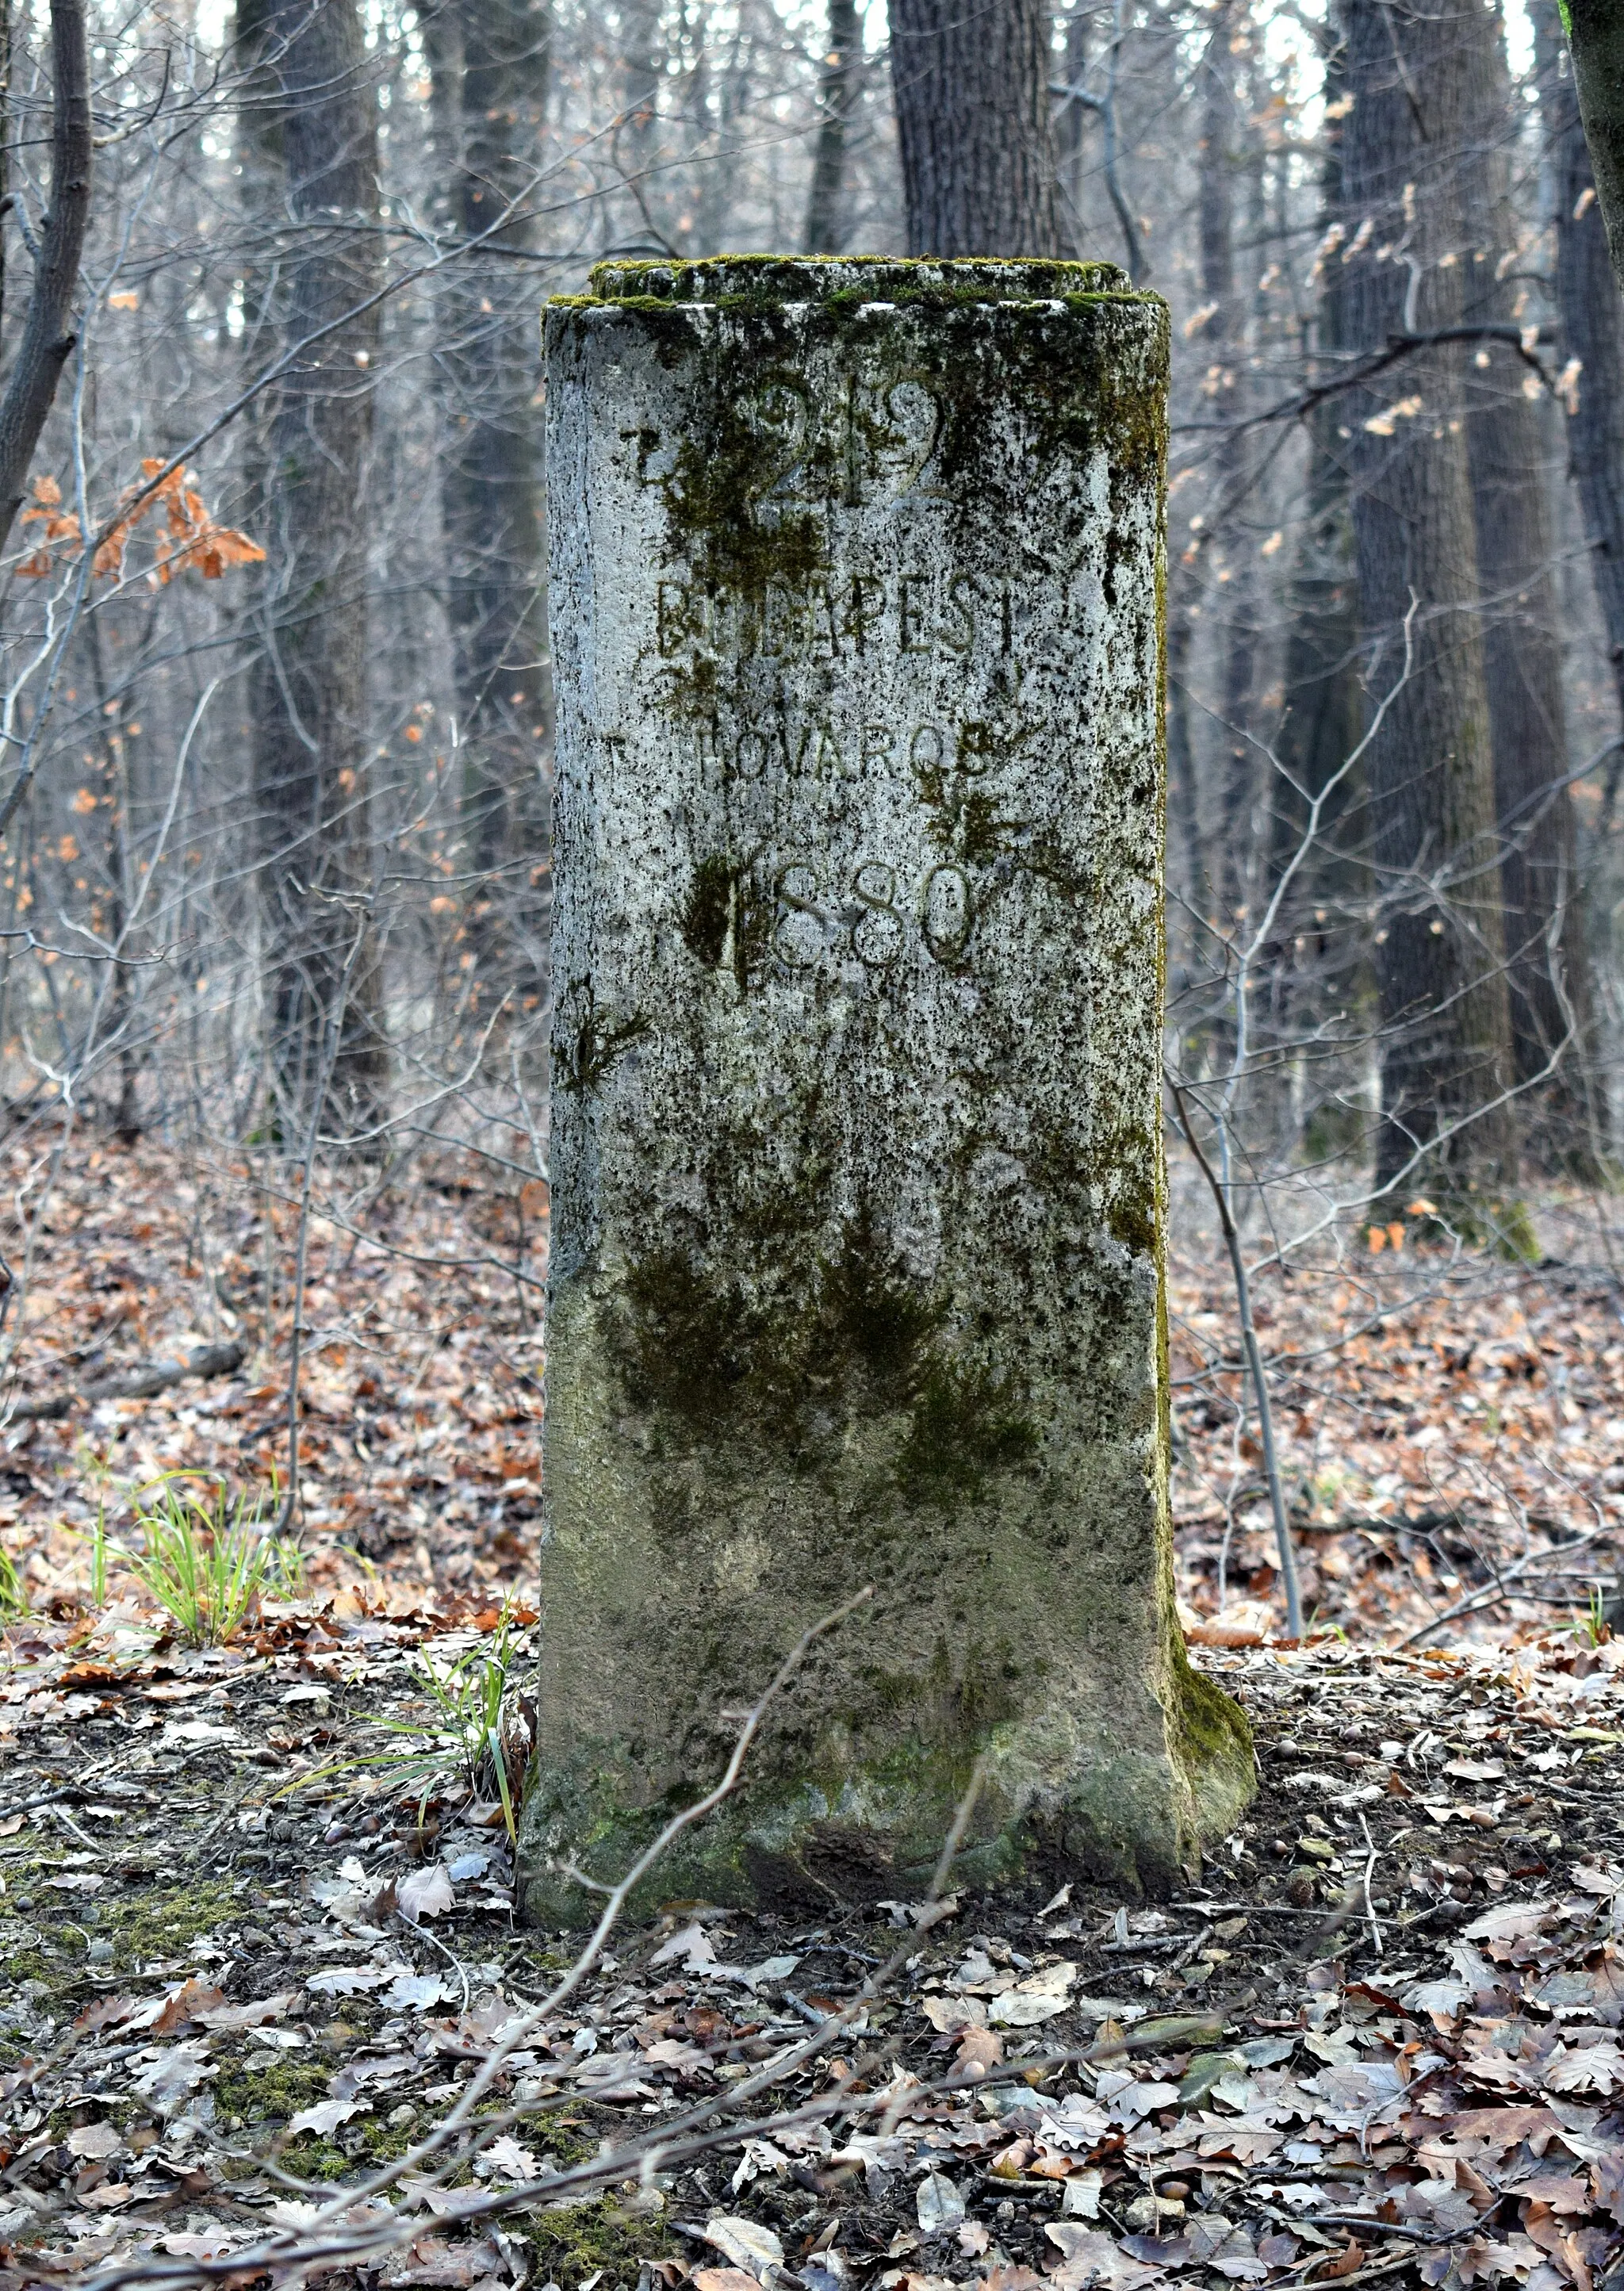 Photo showing: No. 212 boundary stone of Budapest (1880), originally stood on the boundary with Budakeszi. It is located in the middle of the forest on the northwestern slope of János-hegy, not far from the yellow hiking trail. The inscription on the other side (Budakesz) was erased after Budakeszierdő was bought by Budapest.